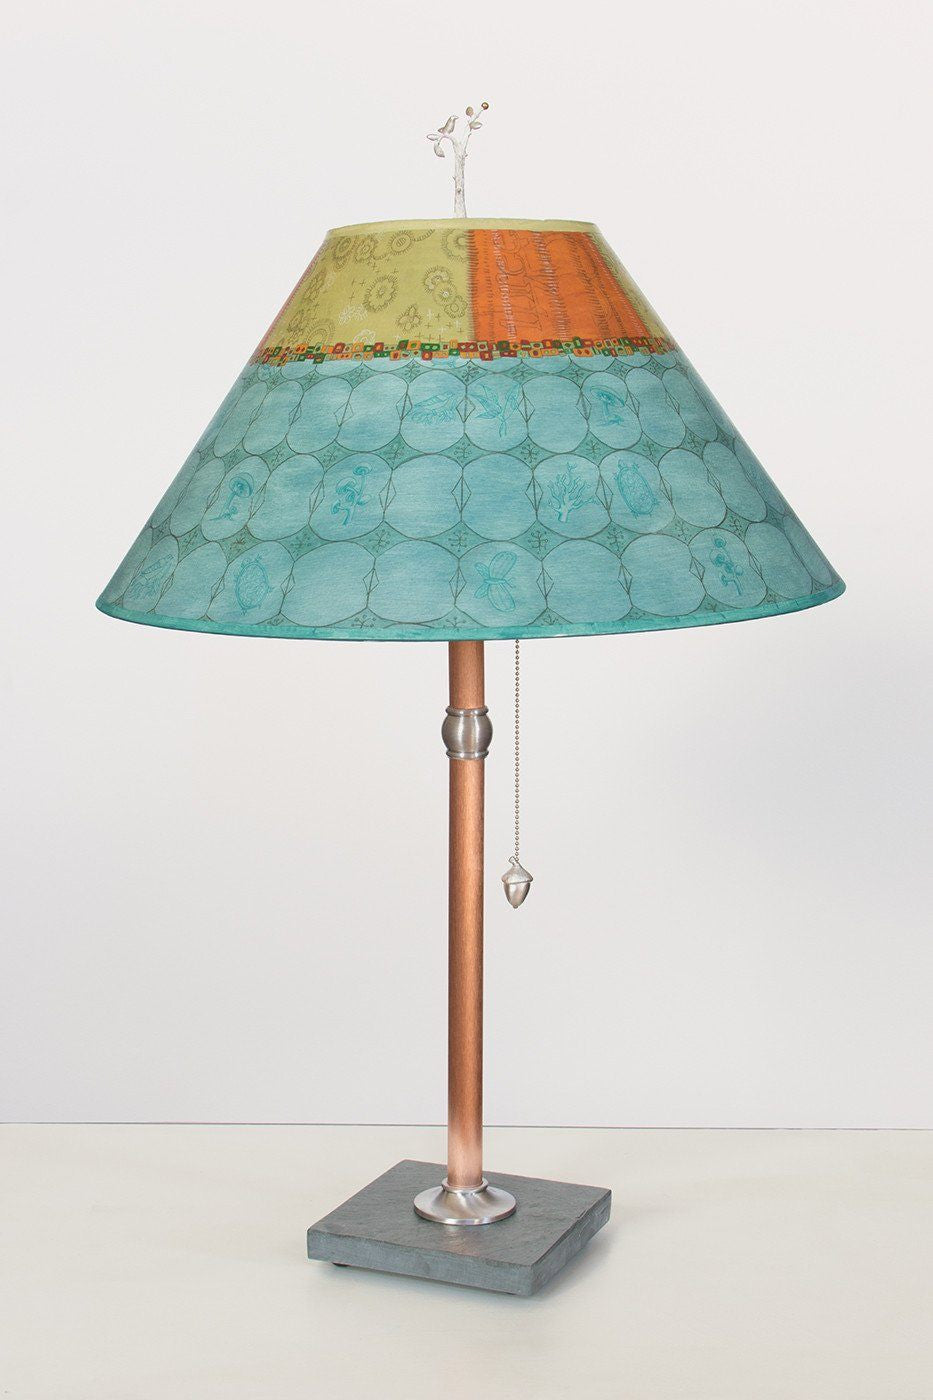 Janna Ugone & Co Table Lamps Copper Table Lamp with Large Conical Shade in Paradise Pool